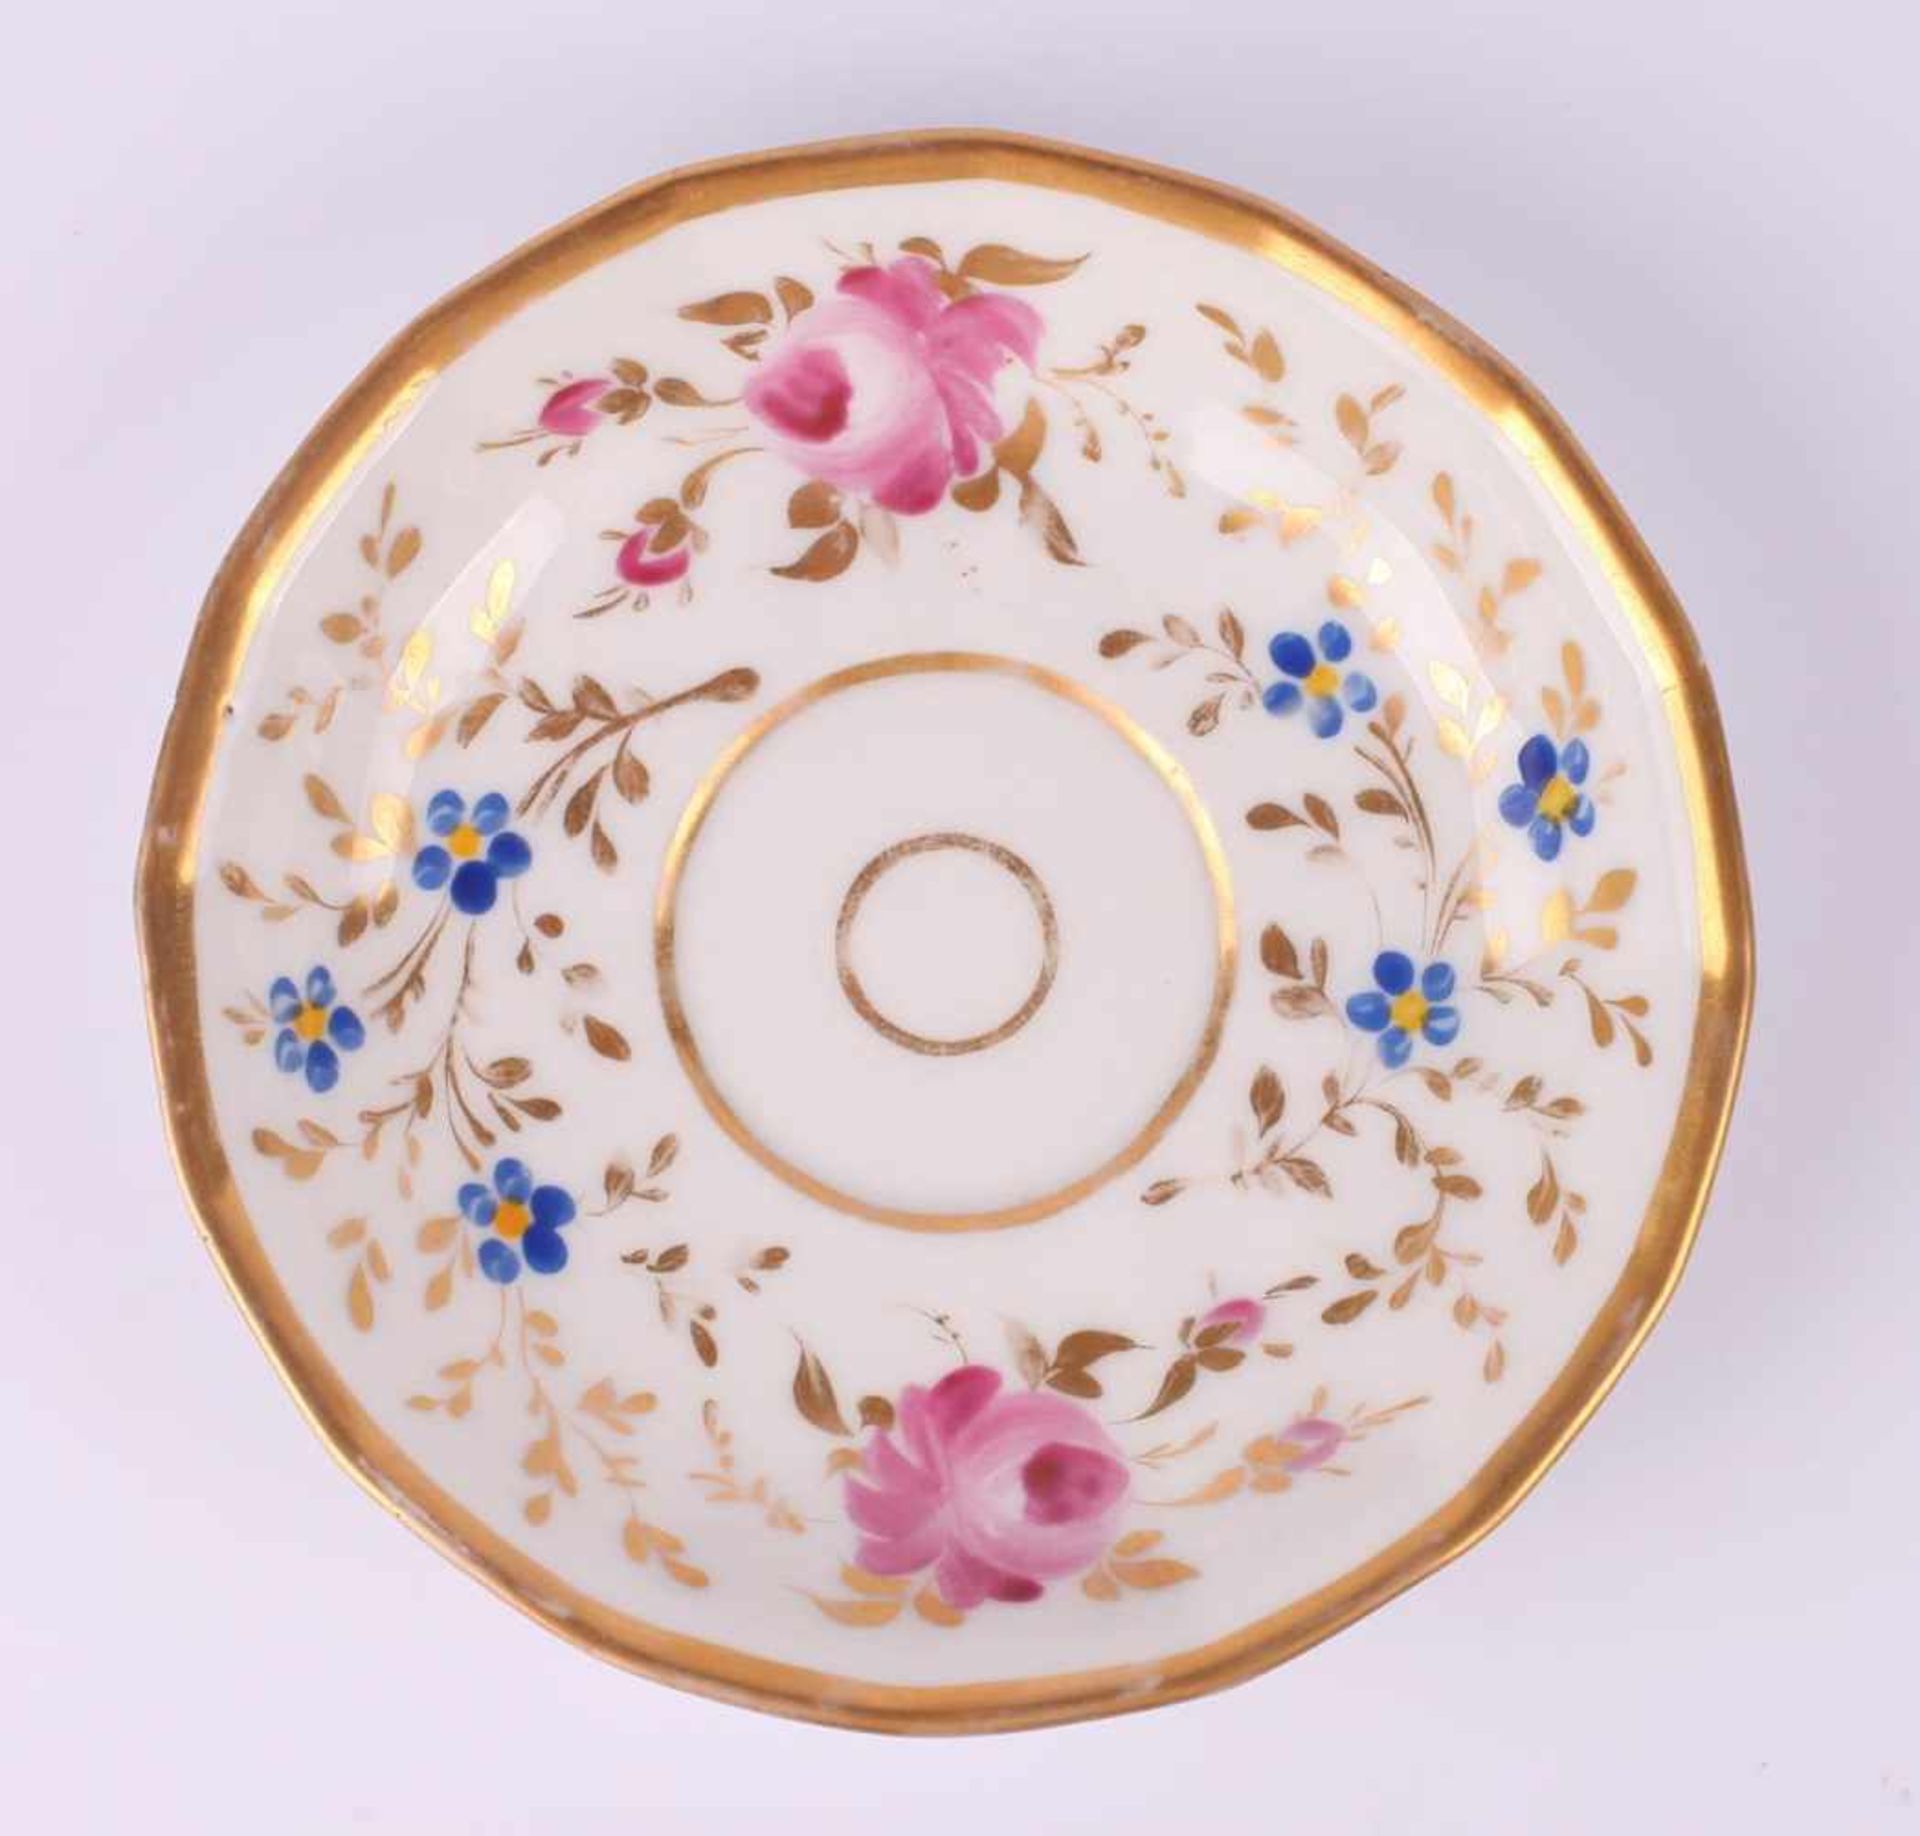 Tea cup and saucer set with floral painting. [Popov].Russia. 1850s Porcelain, painting, gilding. - Bild 11 aus 13